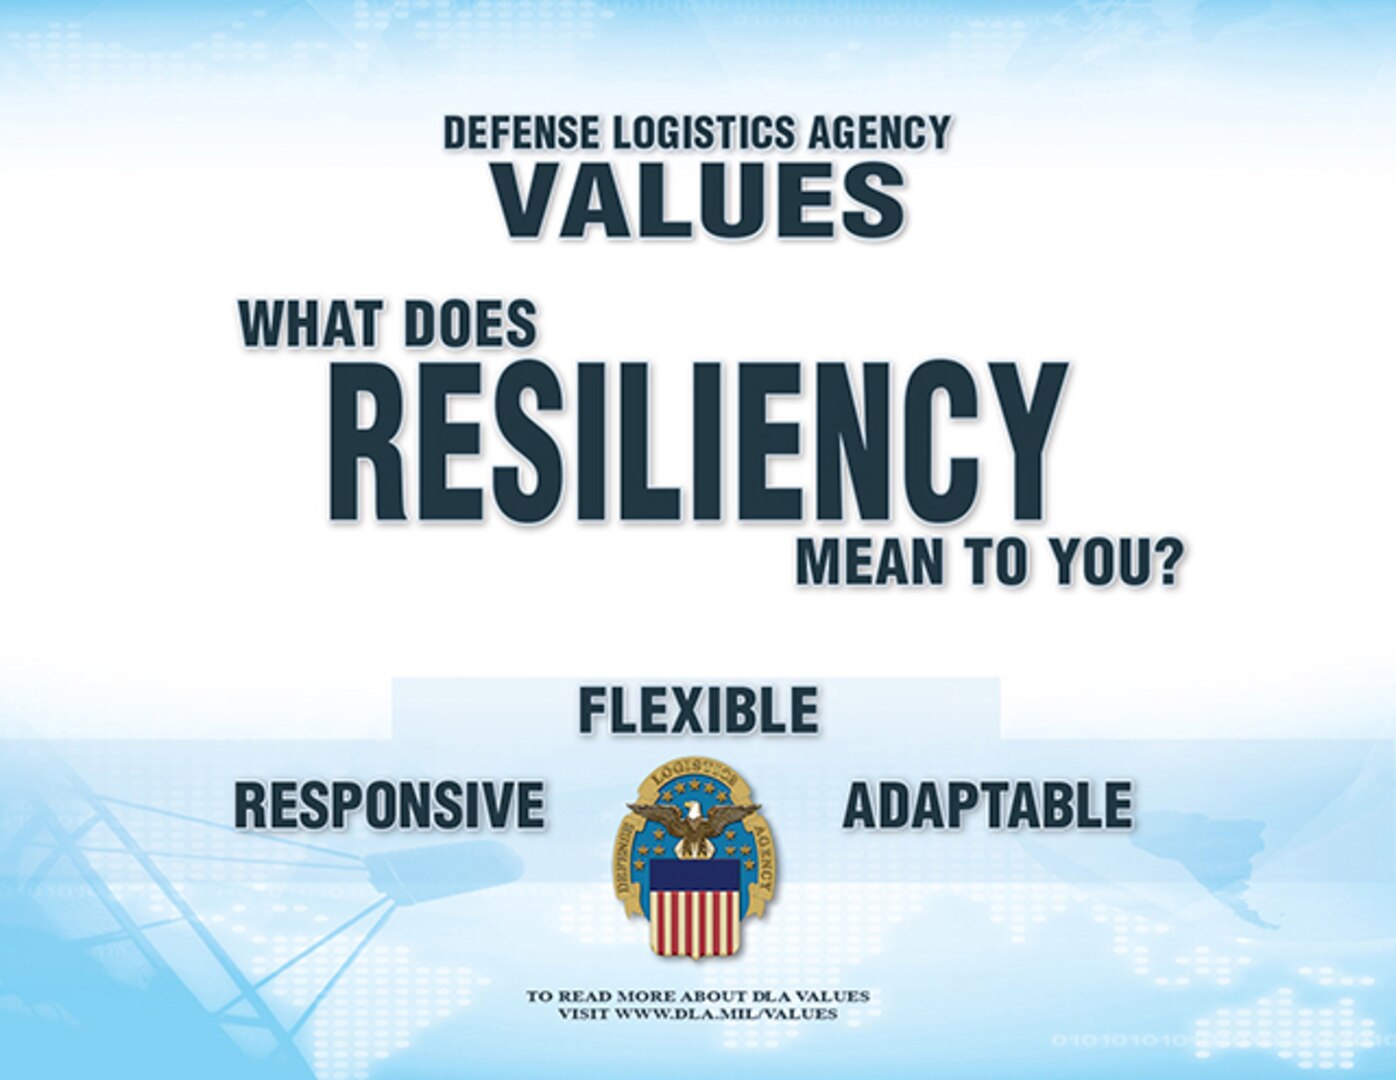 Defense Logistics Agency recently releasedThe Profiles in Resiliency video series and among the most recent included DLA Aviation employees sharing their stories and describing what they did to stay strong and resilient.